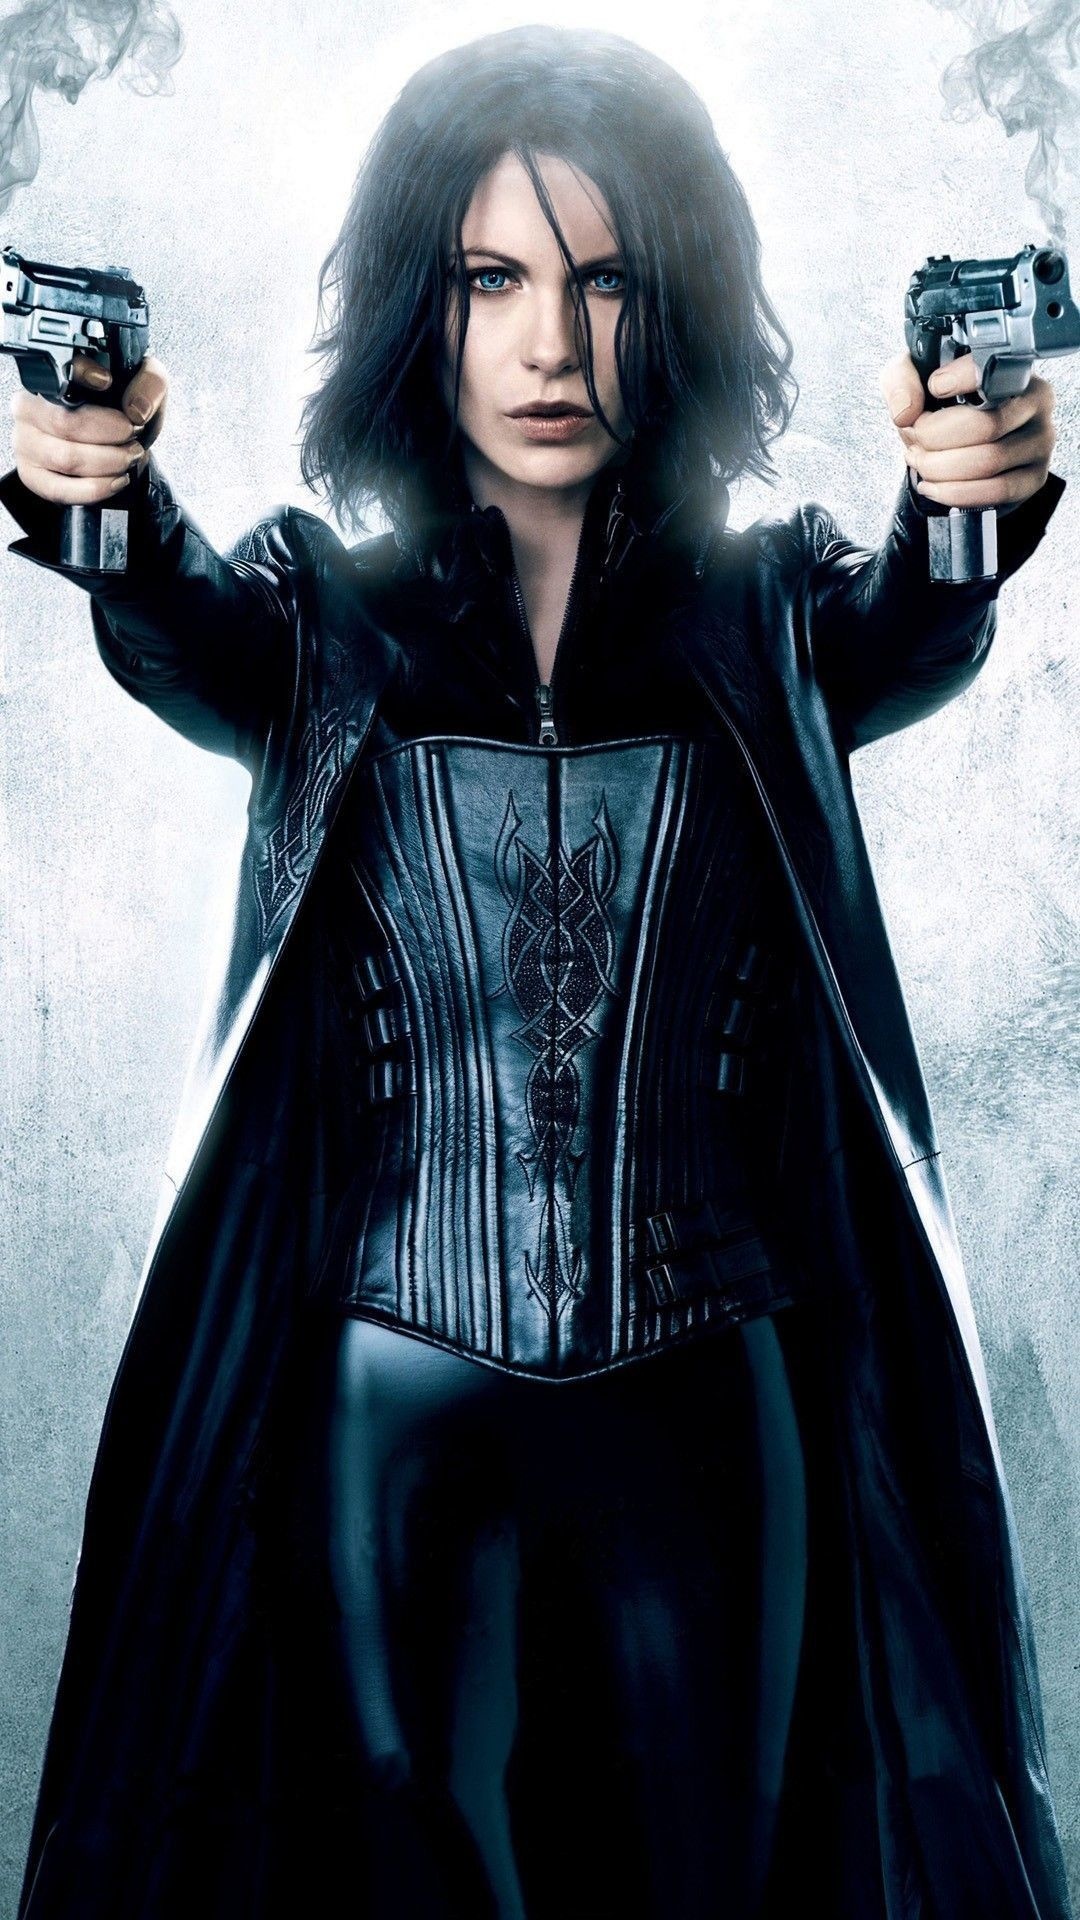 Selene (Underworld): The story of warring Vampires and Lycans, Blood Wars. 1080x1920 Full HD Wallpaper.